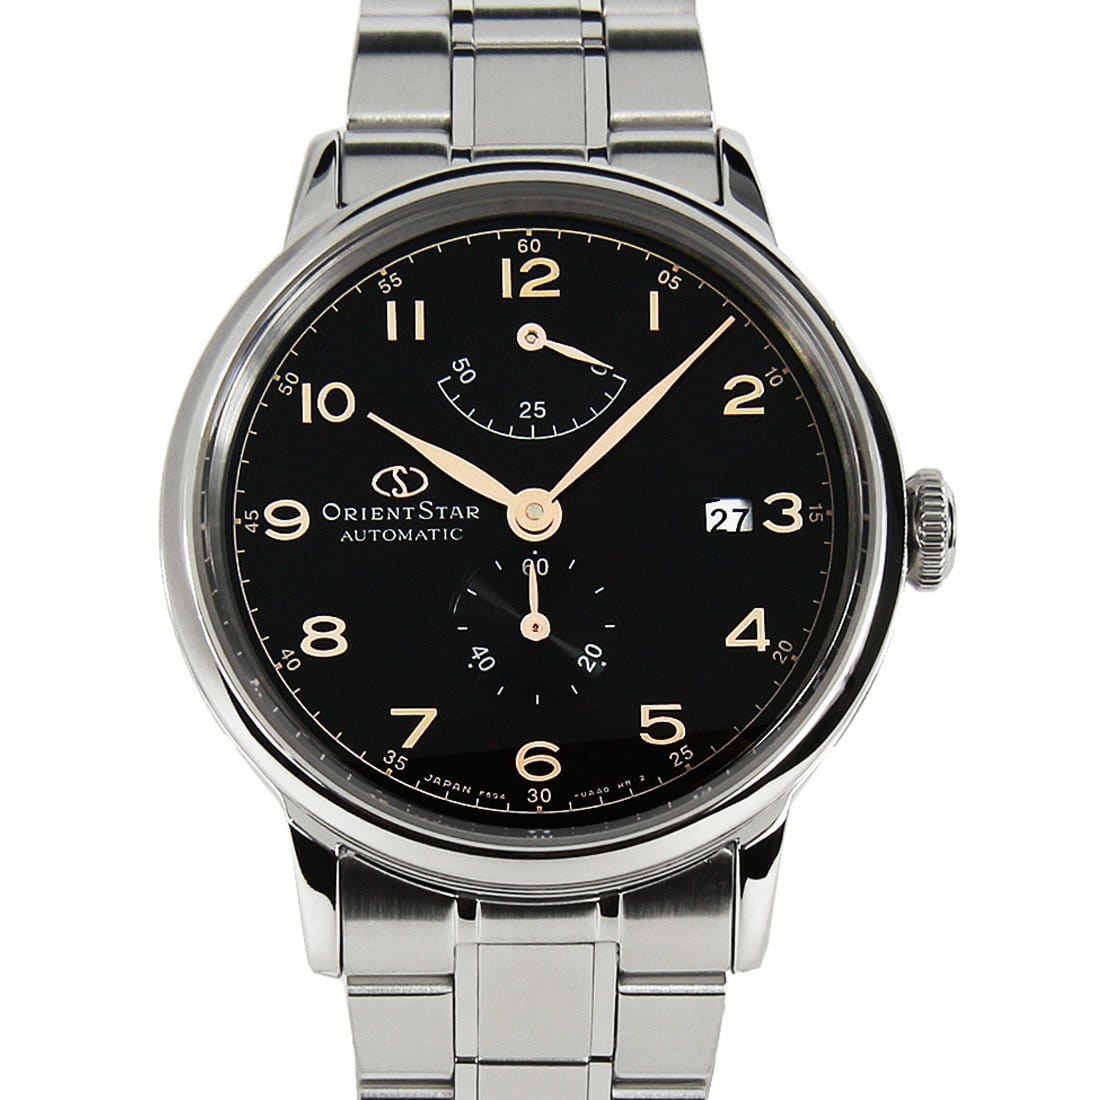 Orient Star Japan Automatic Watch RE-AW0001B RE-AW0001B00B